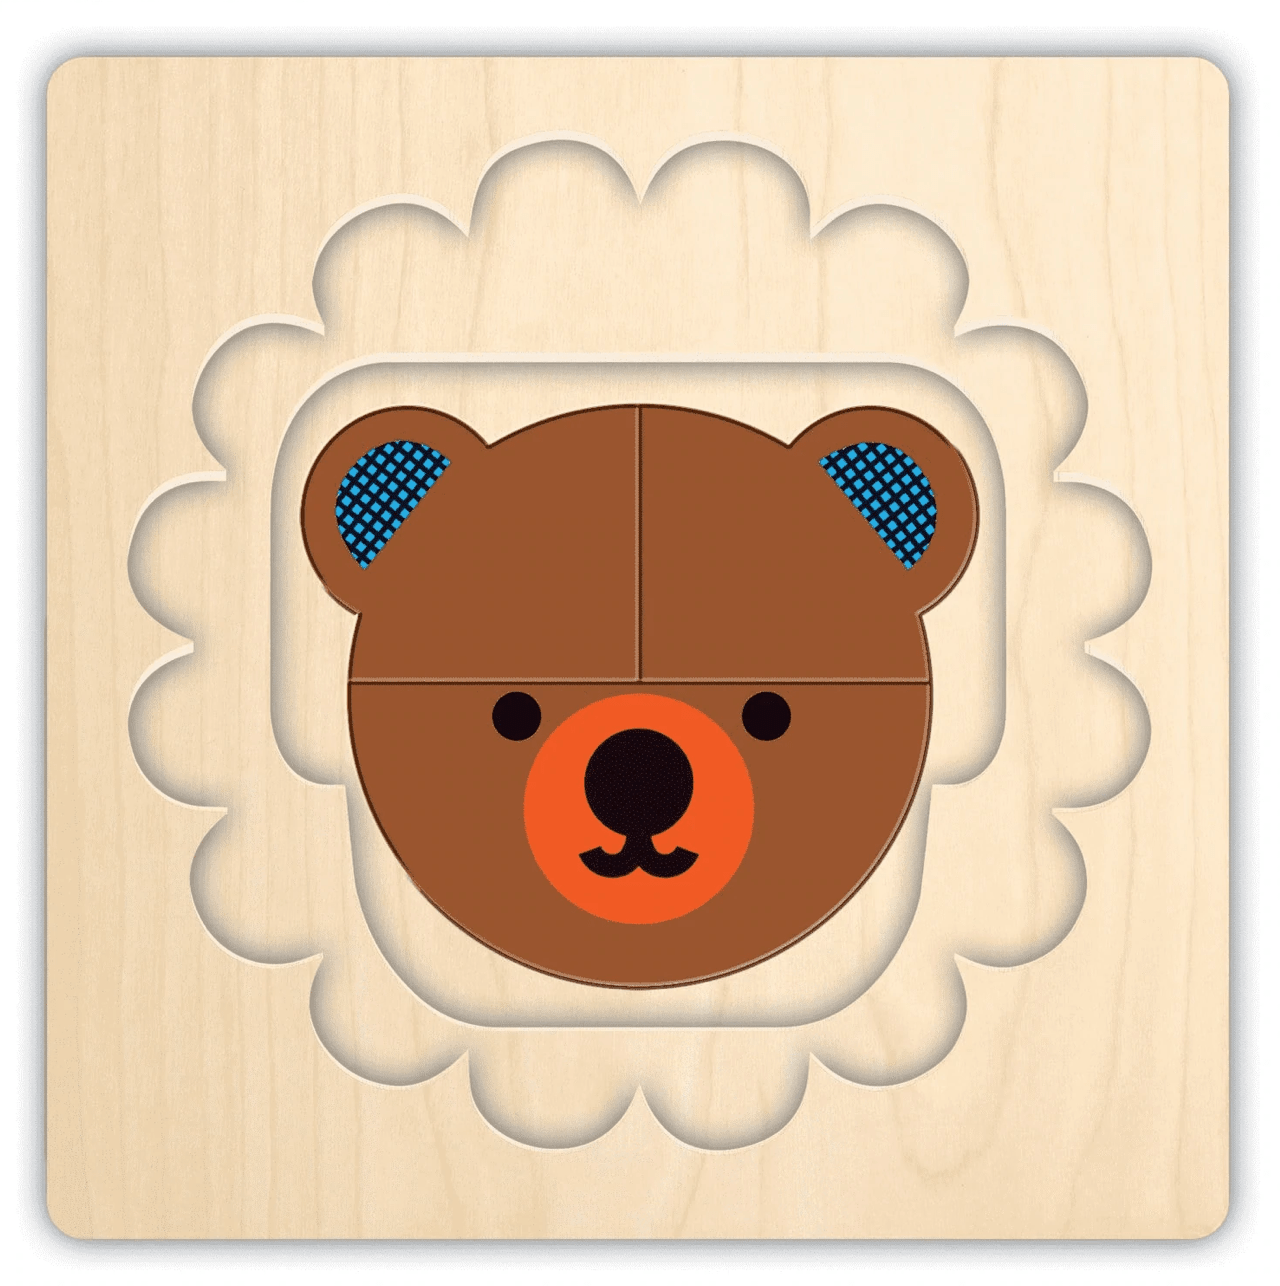 Animal Faces 4 Layer Wood Puzzle - Twinkle Twinkle Little One